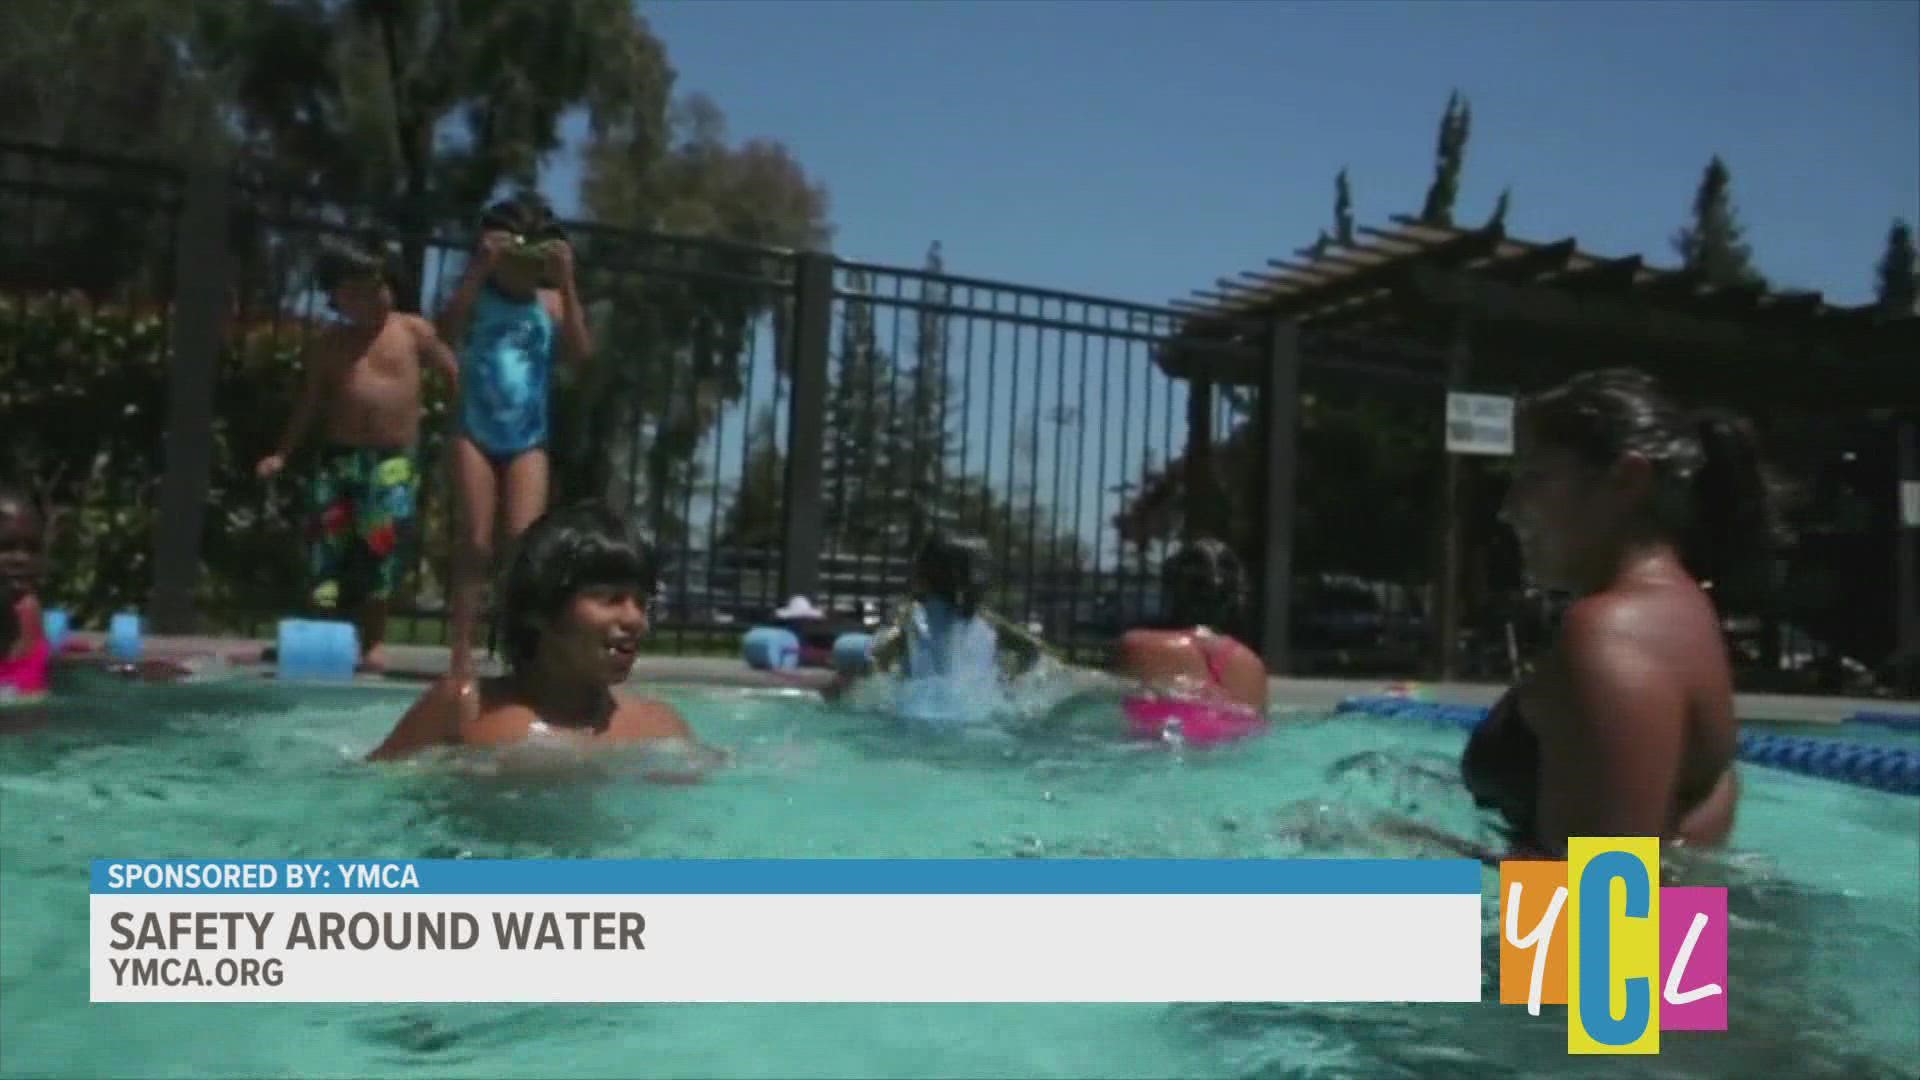 Just in time for swim season, we hear from an aquatic expert about the critical need to teach children and adults how to swim. This segment paid for by the YMCA.